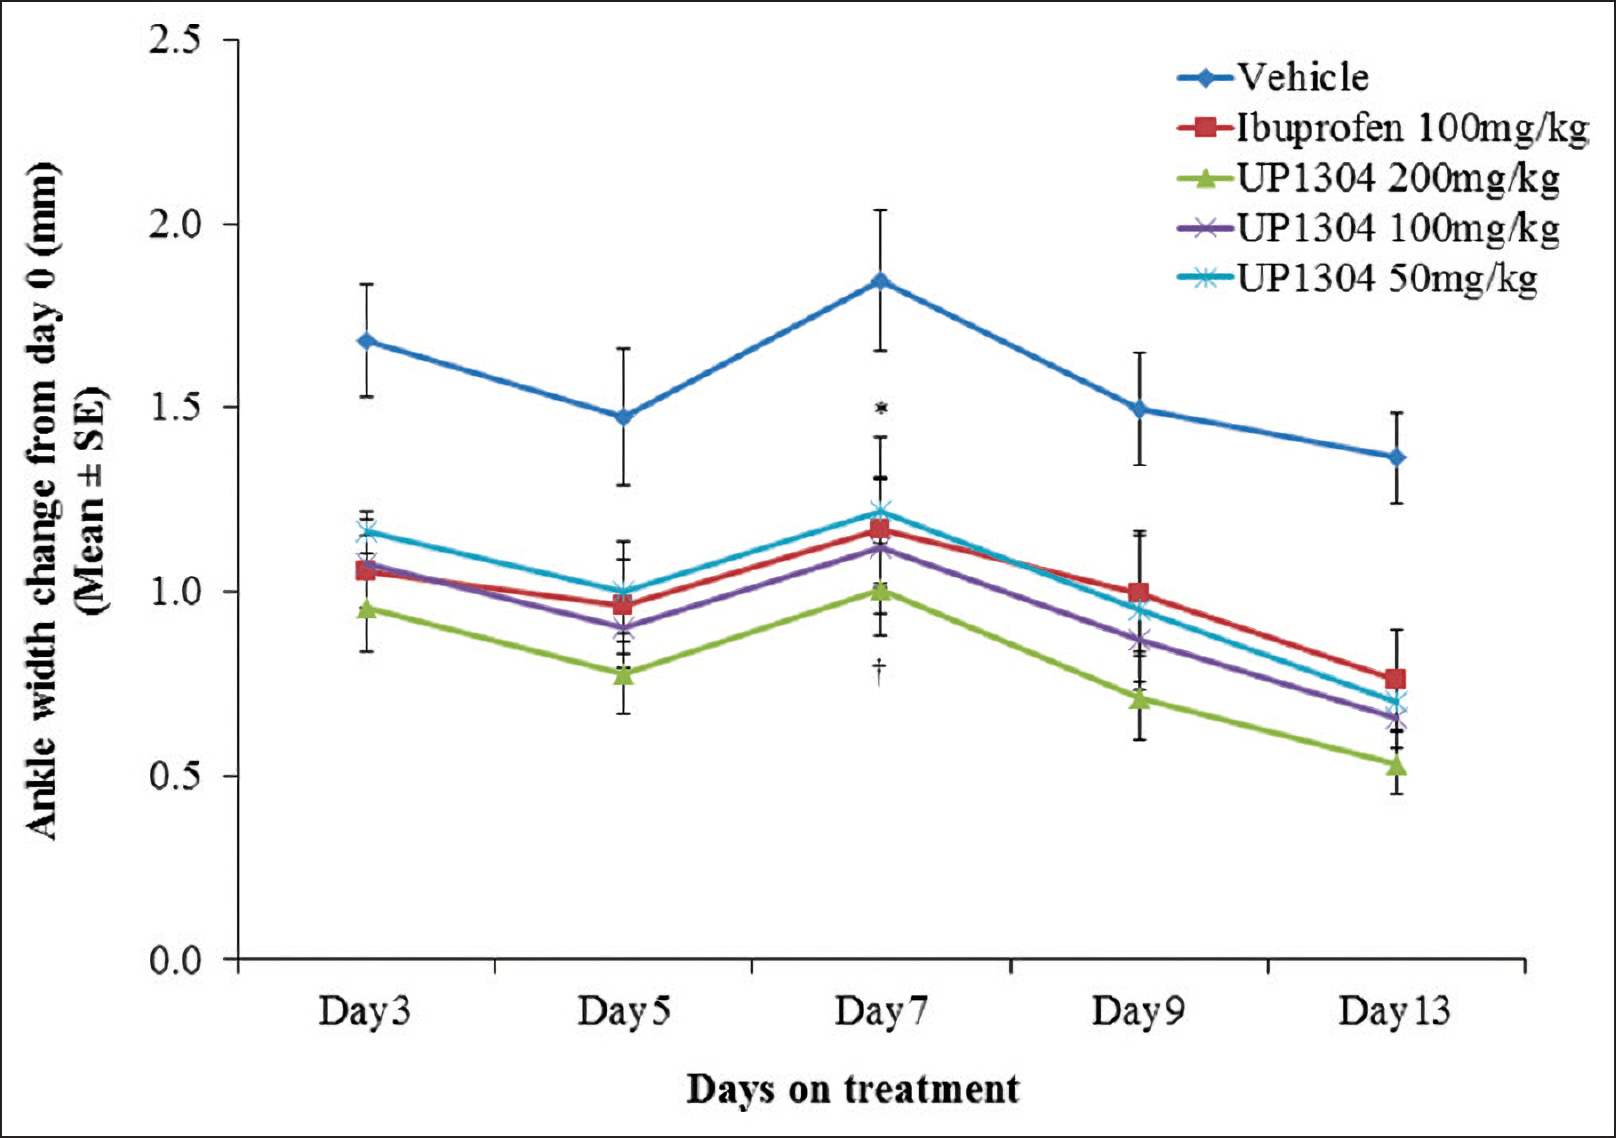 Anti-inflammatory effect of UP1304 as measured by ankle diameter in adjuvant-induced arthritis.